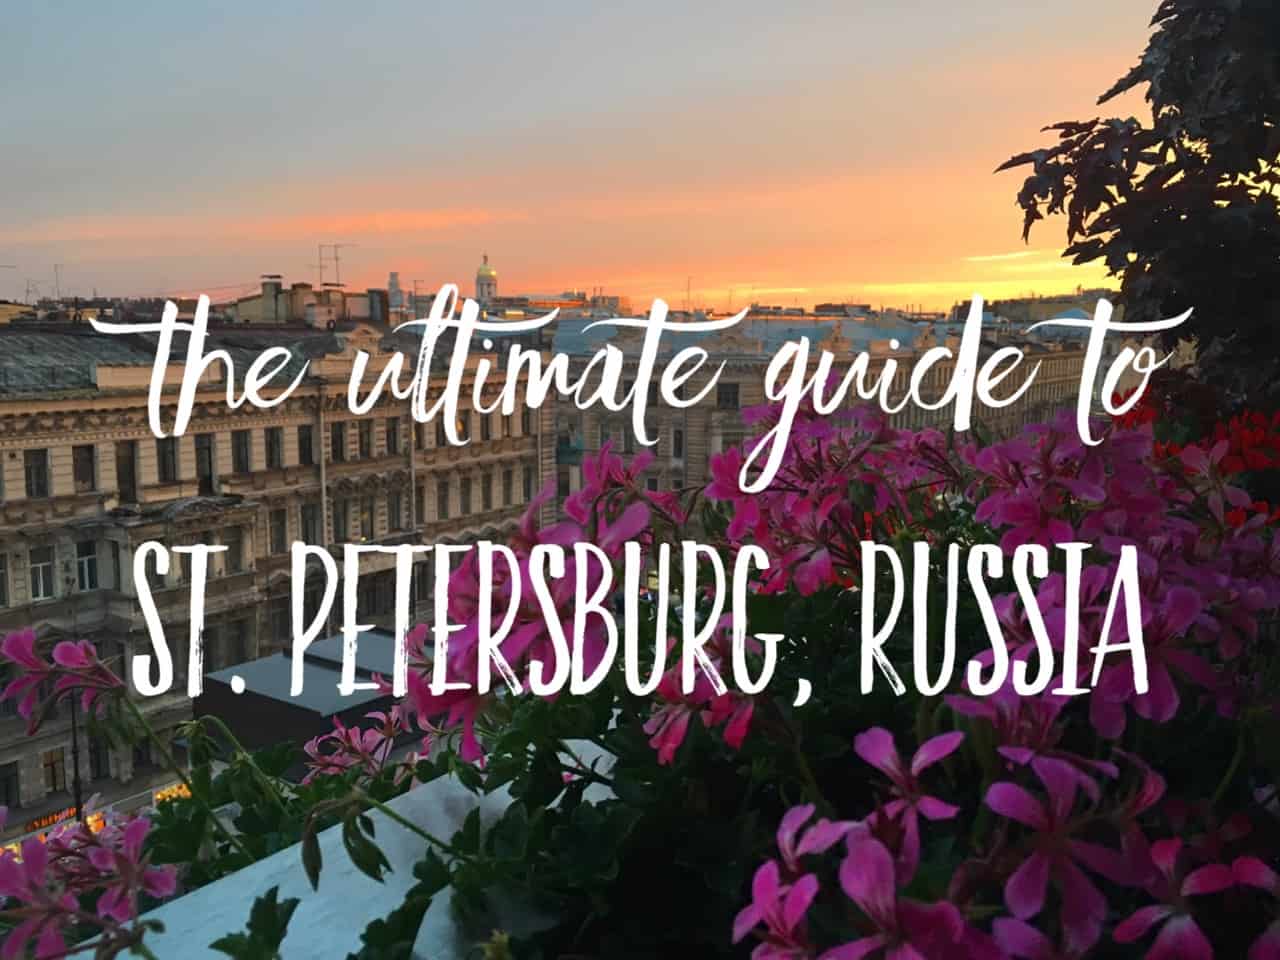 The ultimate guide to St. Petersburg, Russia | Tips from a local